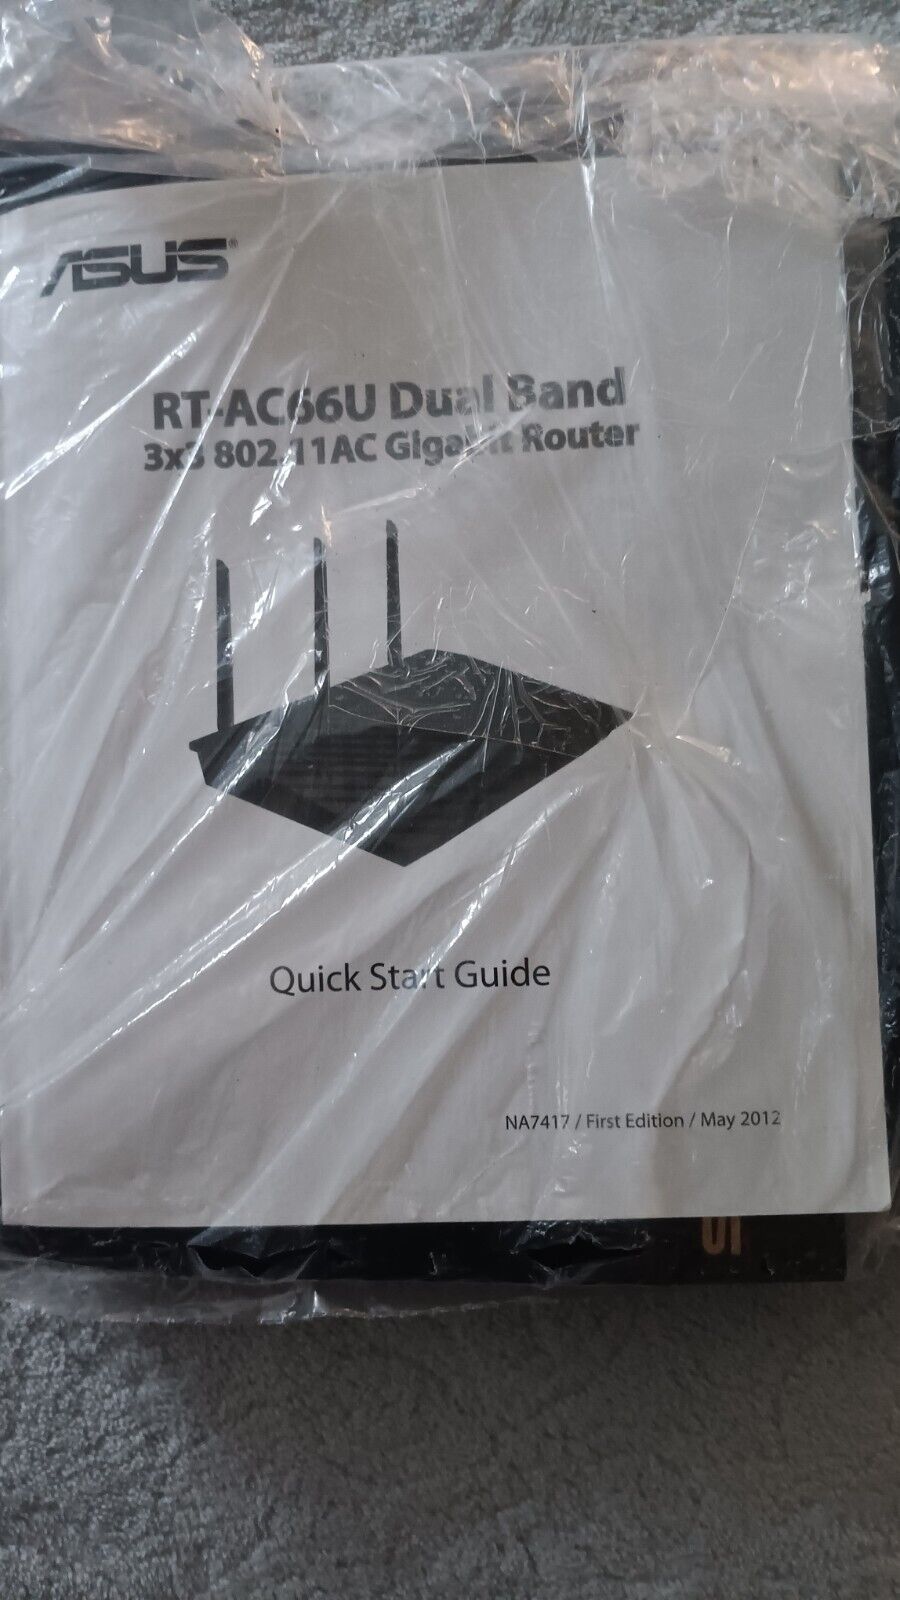 ASUS RT-AC66UWireless Dual Band 3x3 802.11AC Gigabit Router. No Plug. Not Tested